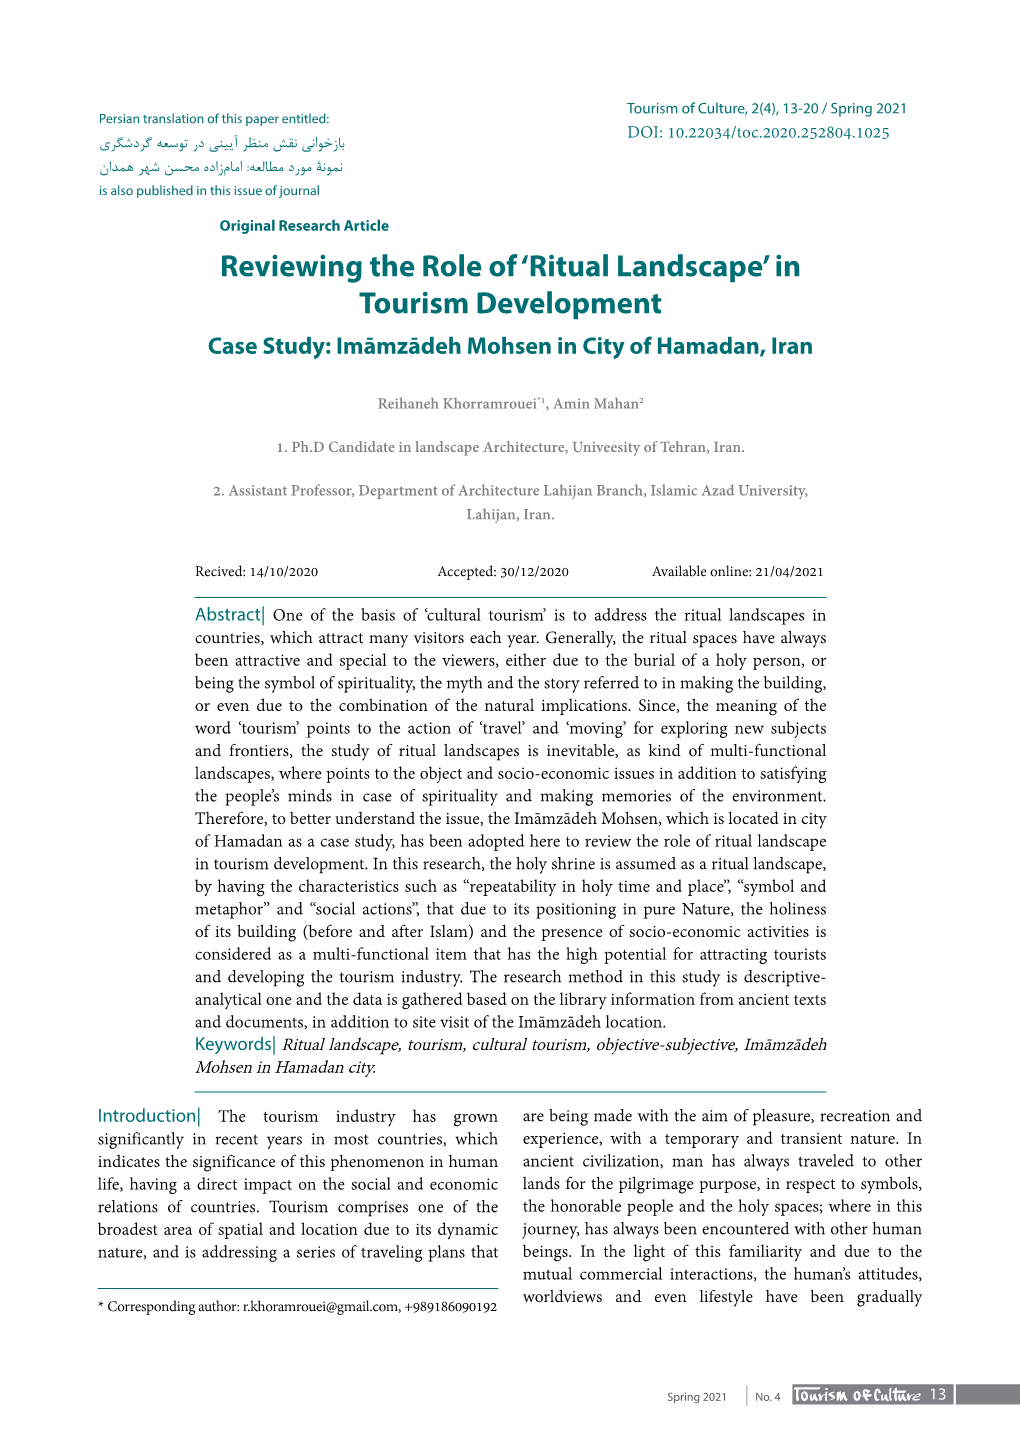 Reviewing the Role of 'Ritual Landscape' in Tourism Development